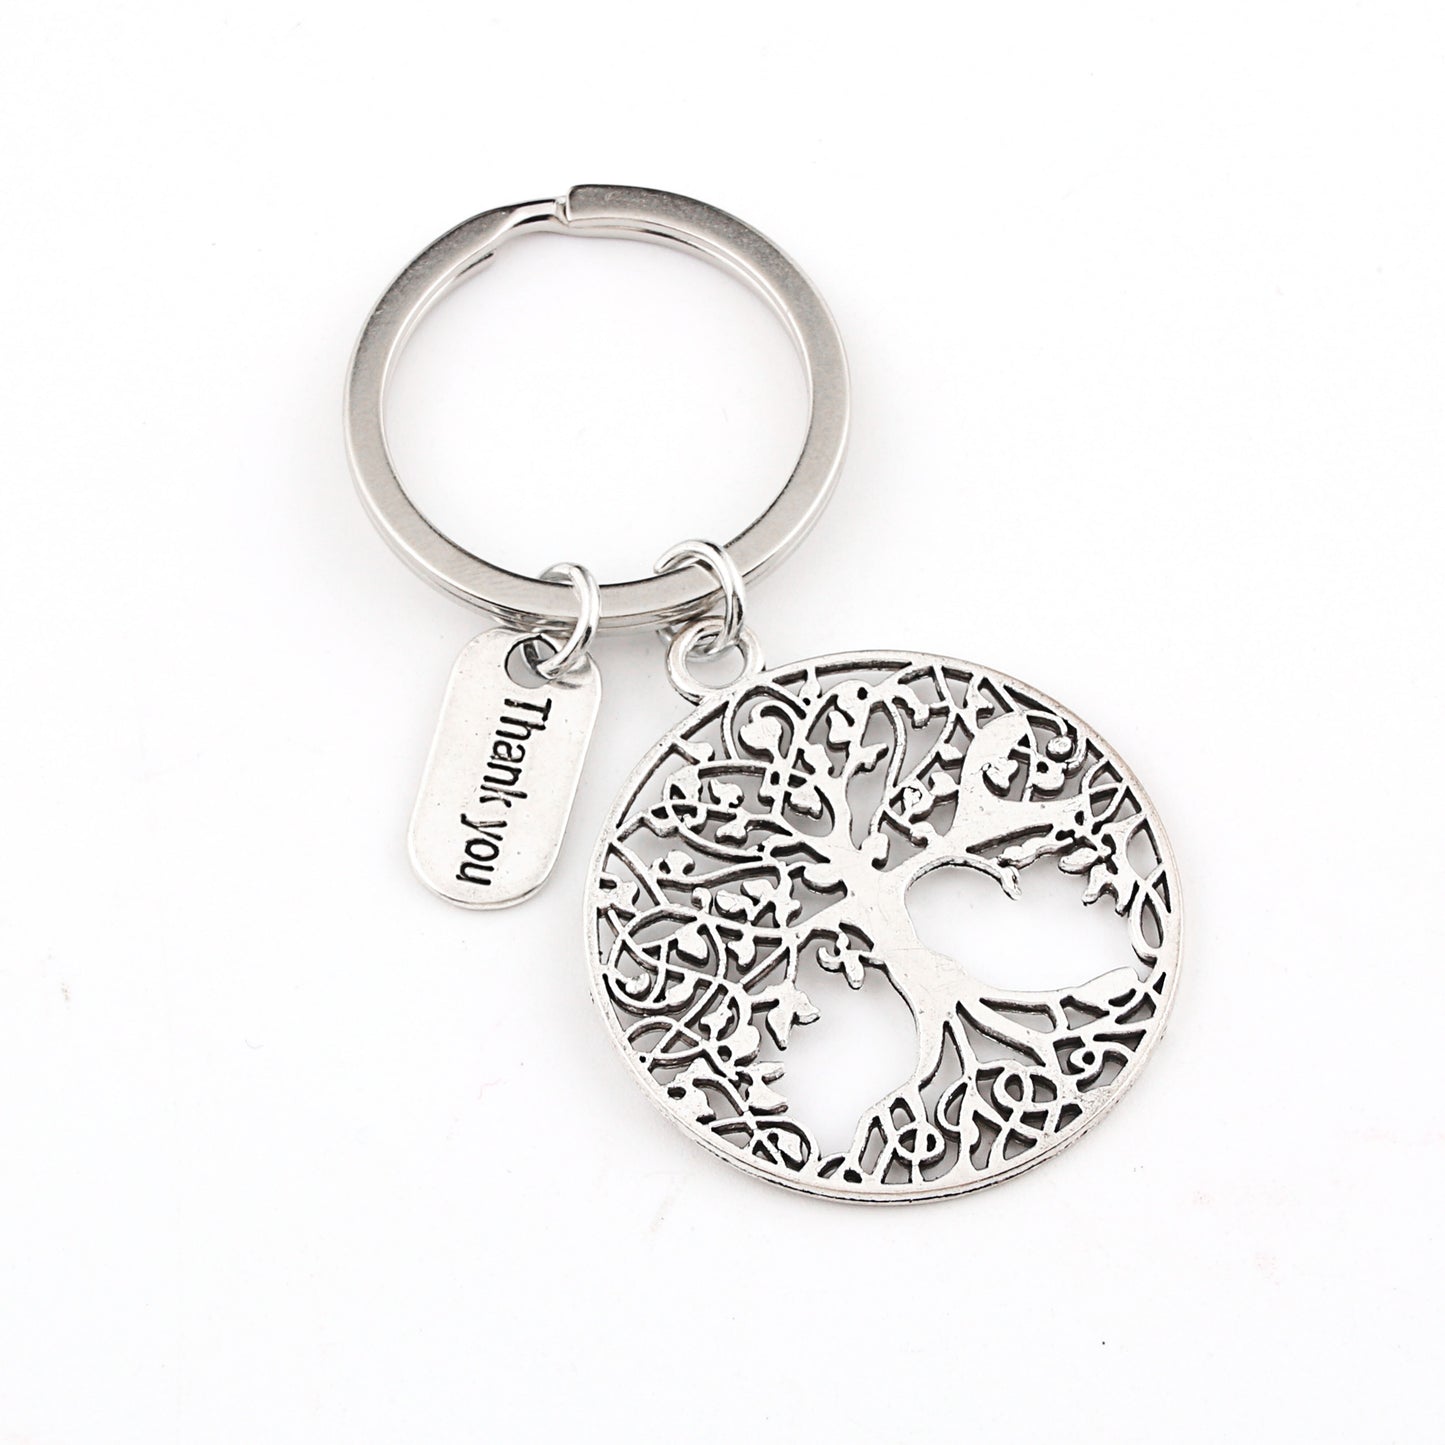 1Pc Tree KeyChain Thanksgiving Day Gift Keyring Handmade Party Souvenir Jewelry E2400